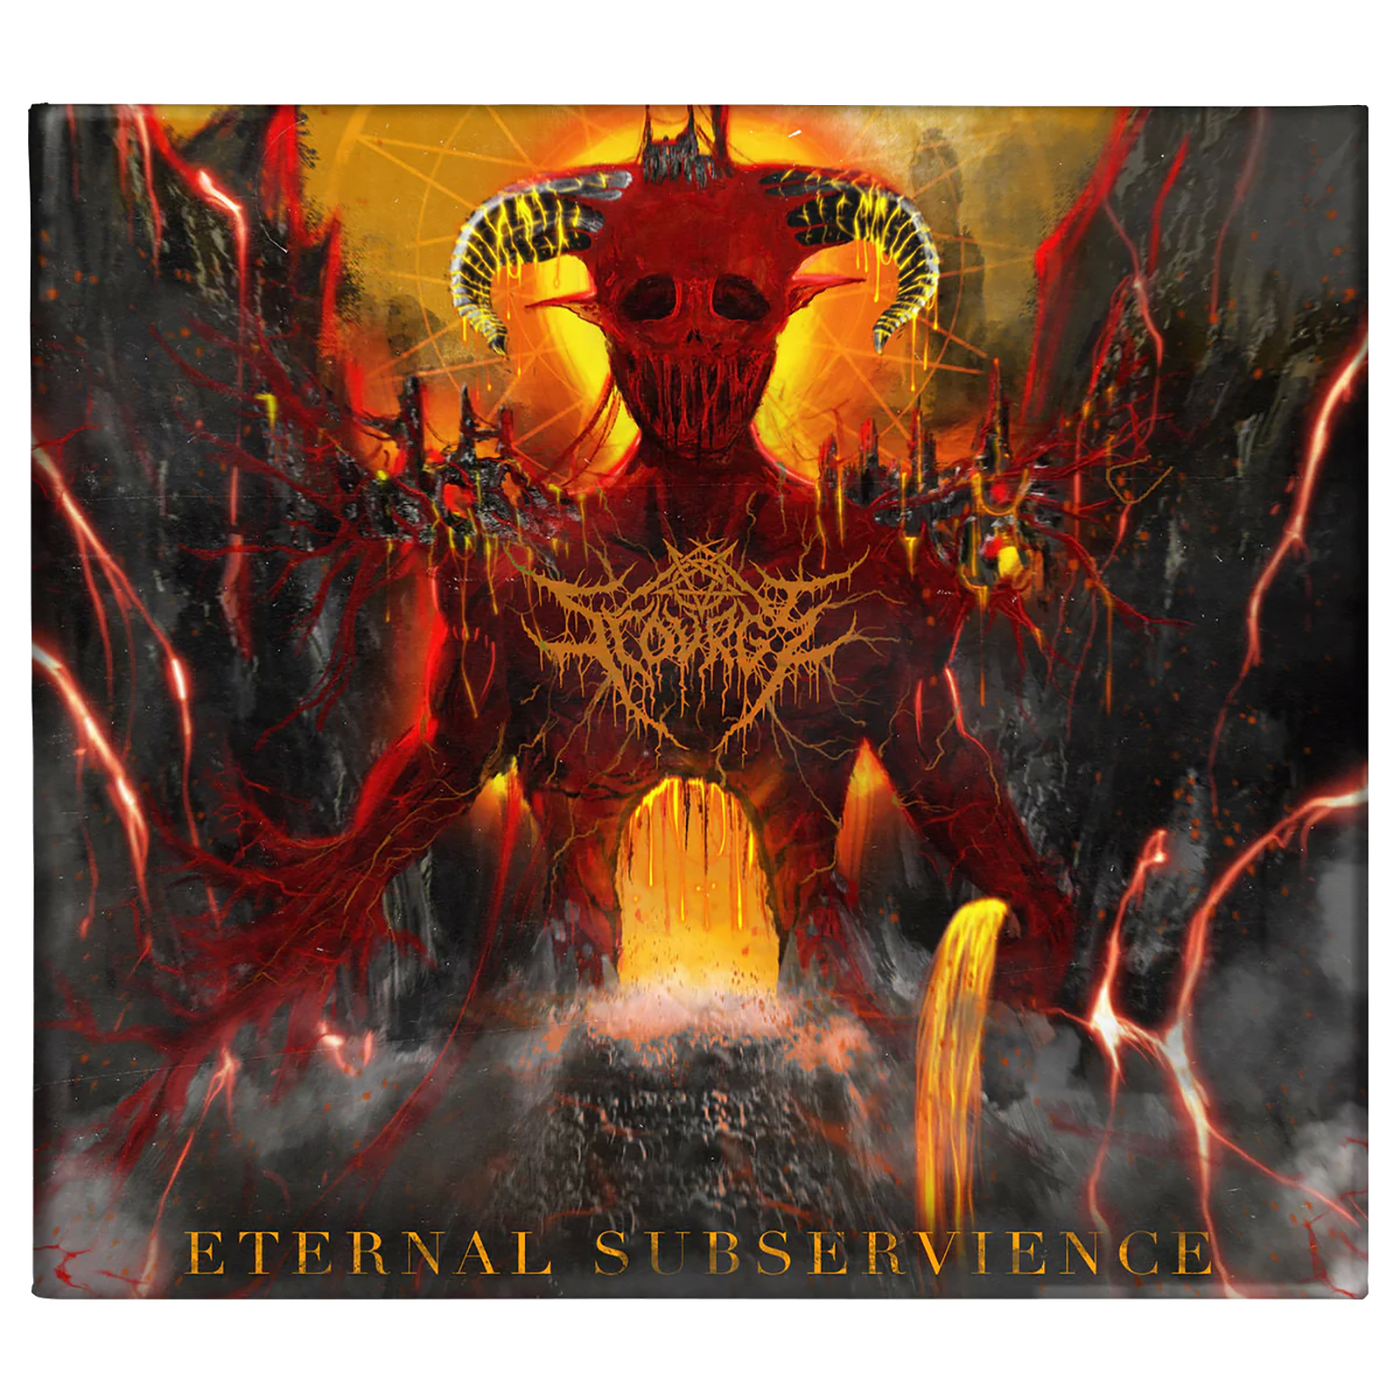 Scourge 'Eternal Subservience' CD